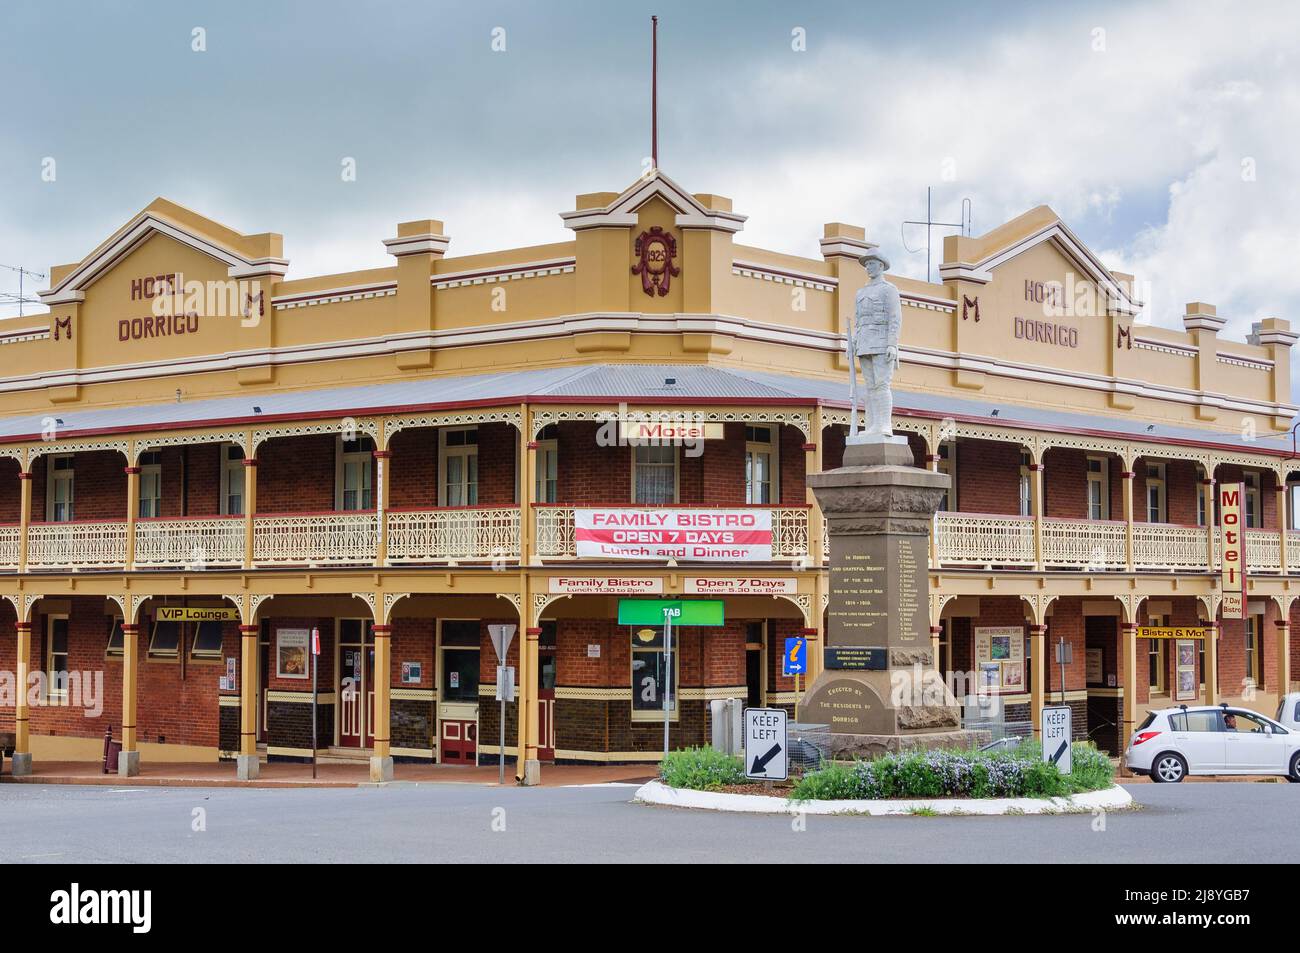 The heritage listed Hotel Dorrigo and the War Memorial in the intersection of Waterfall Way and Hickory Street - Dorrigo, NSW, Australia Stock Photo